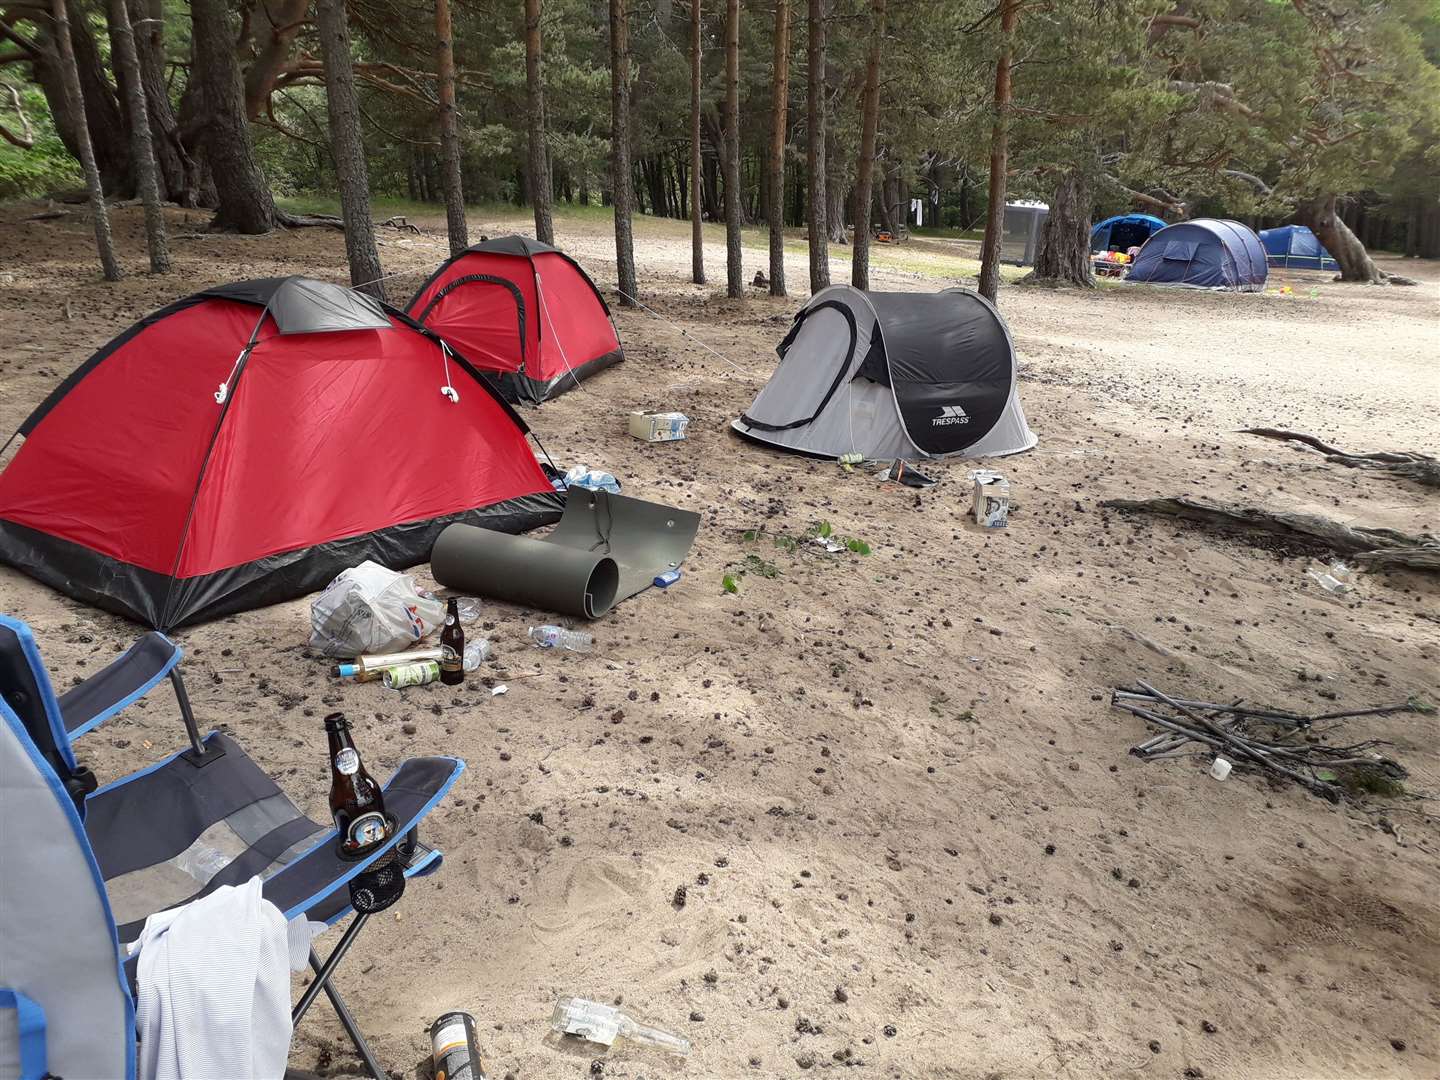 Tents, rubbish and other mess left by campers on the beach – just yards from an official campsite.